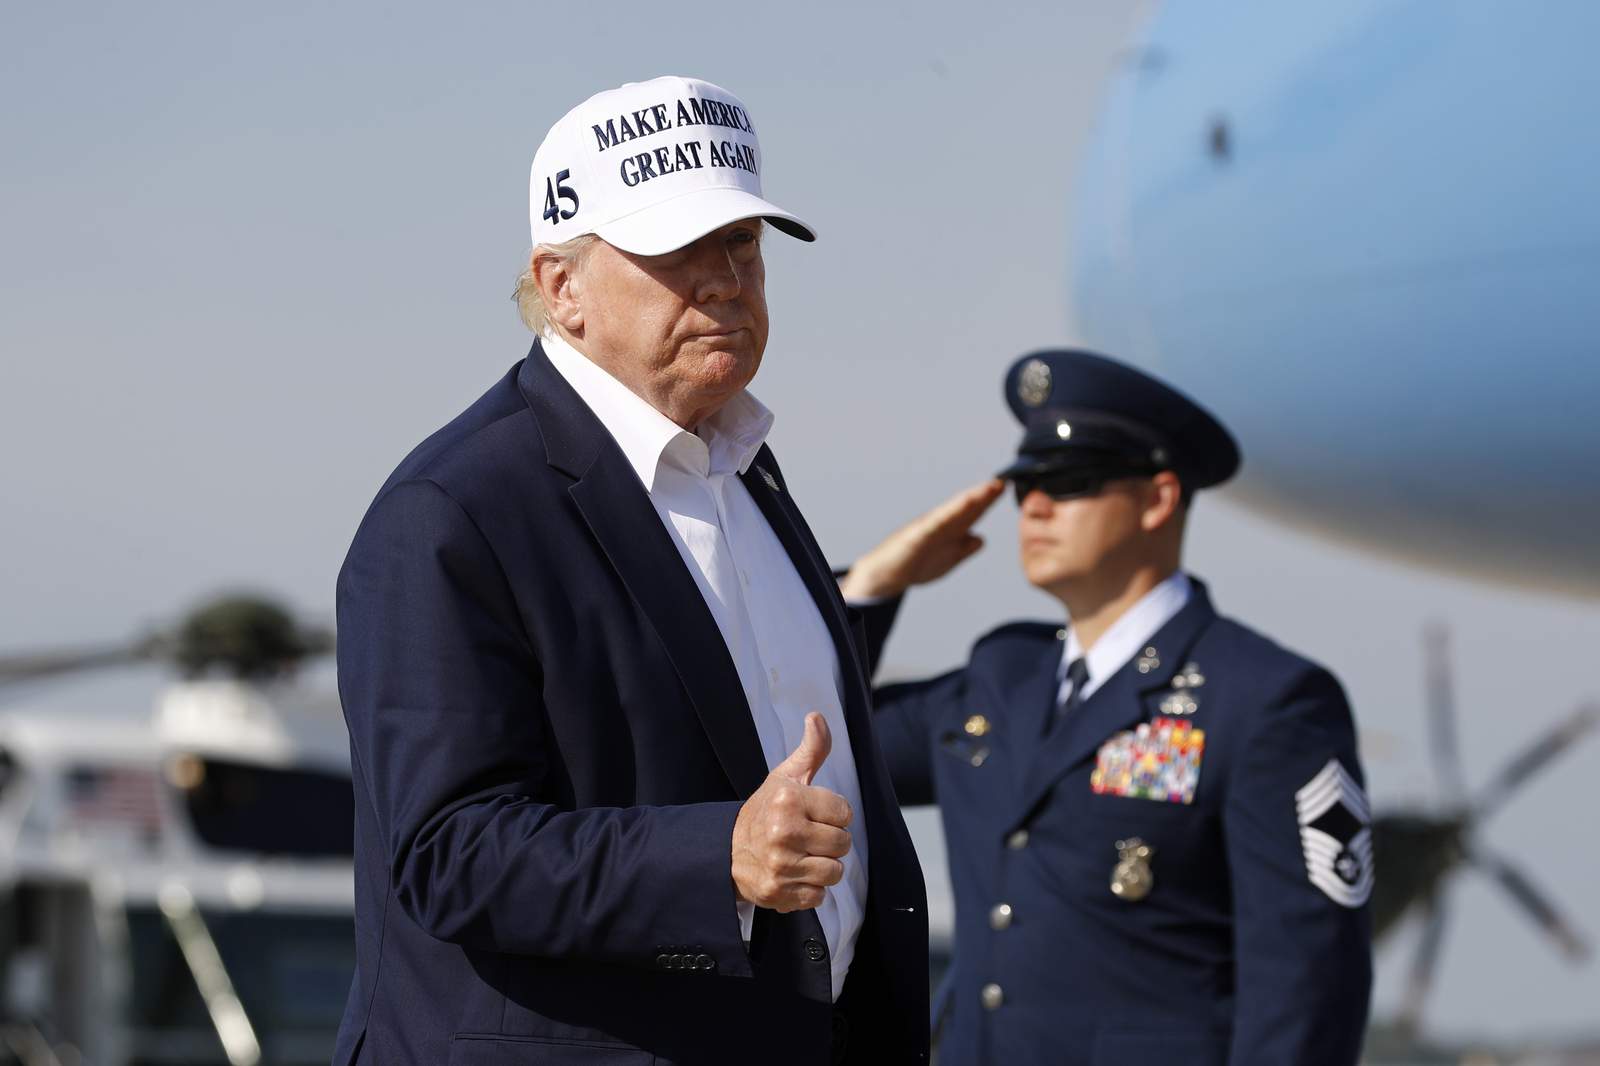 2020 Watch: Can Trump turn around his beleaguered campaign?